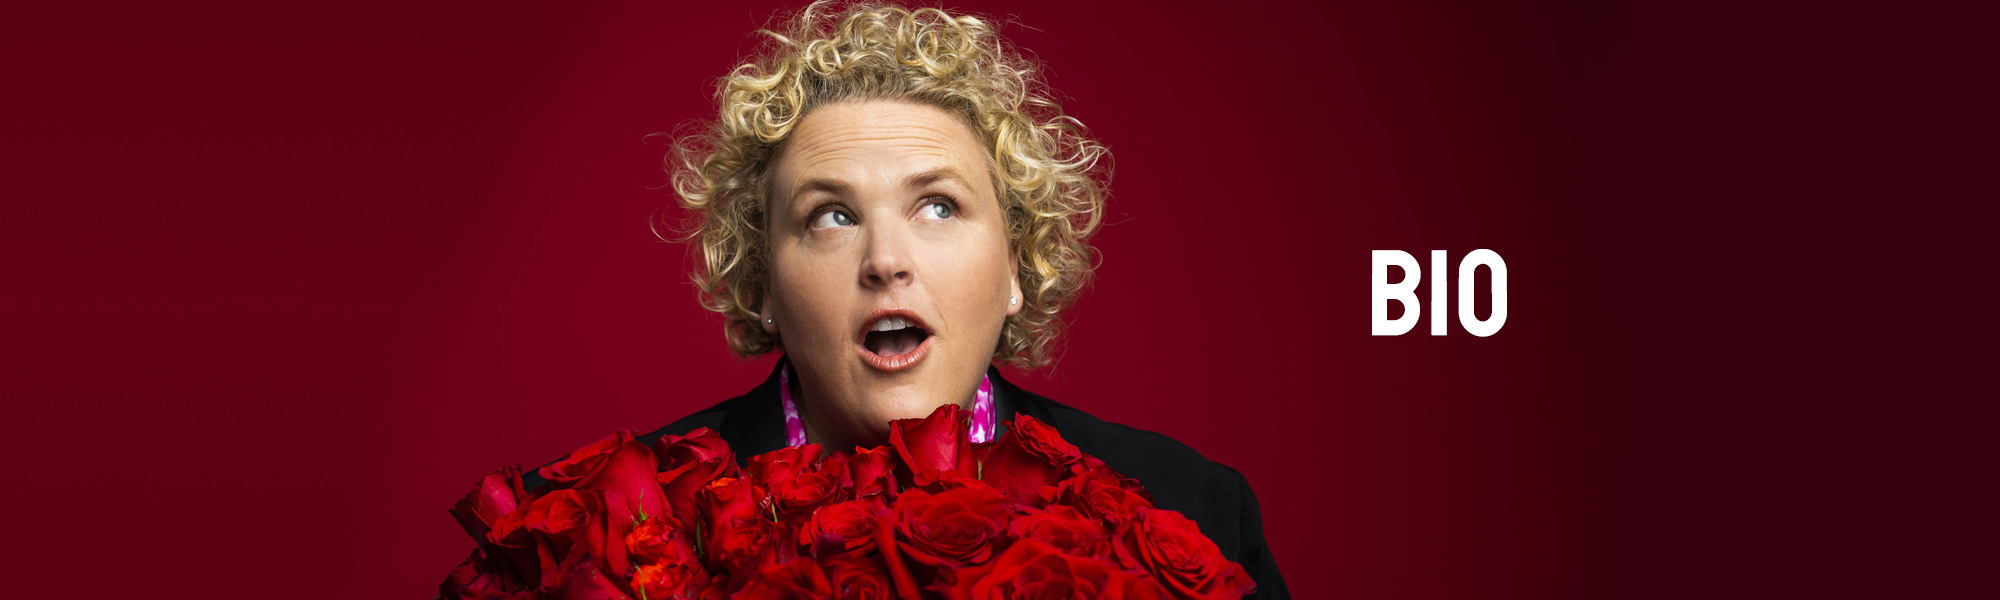 Comedian Fortune Feimster holding a large bouquet of red roses in front of a dark red background.